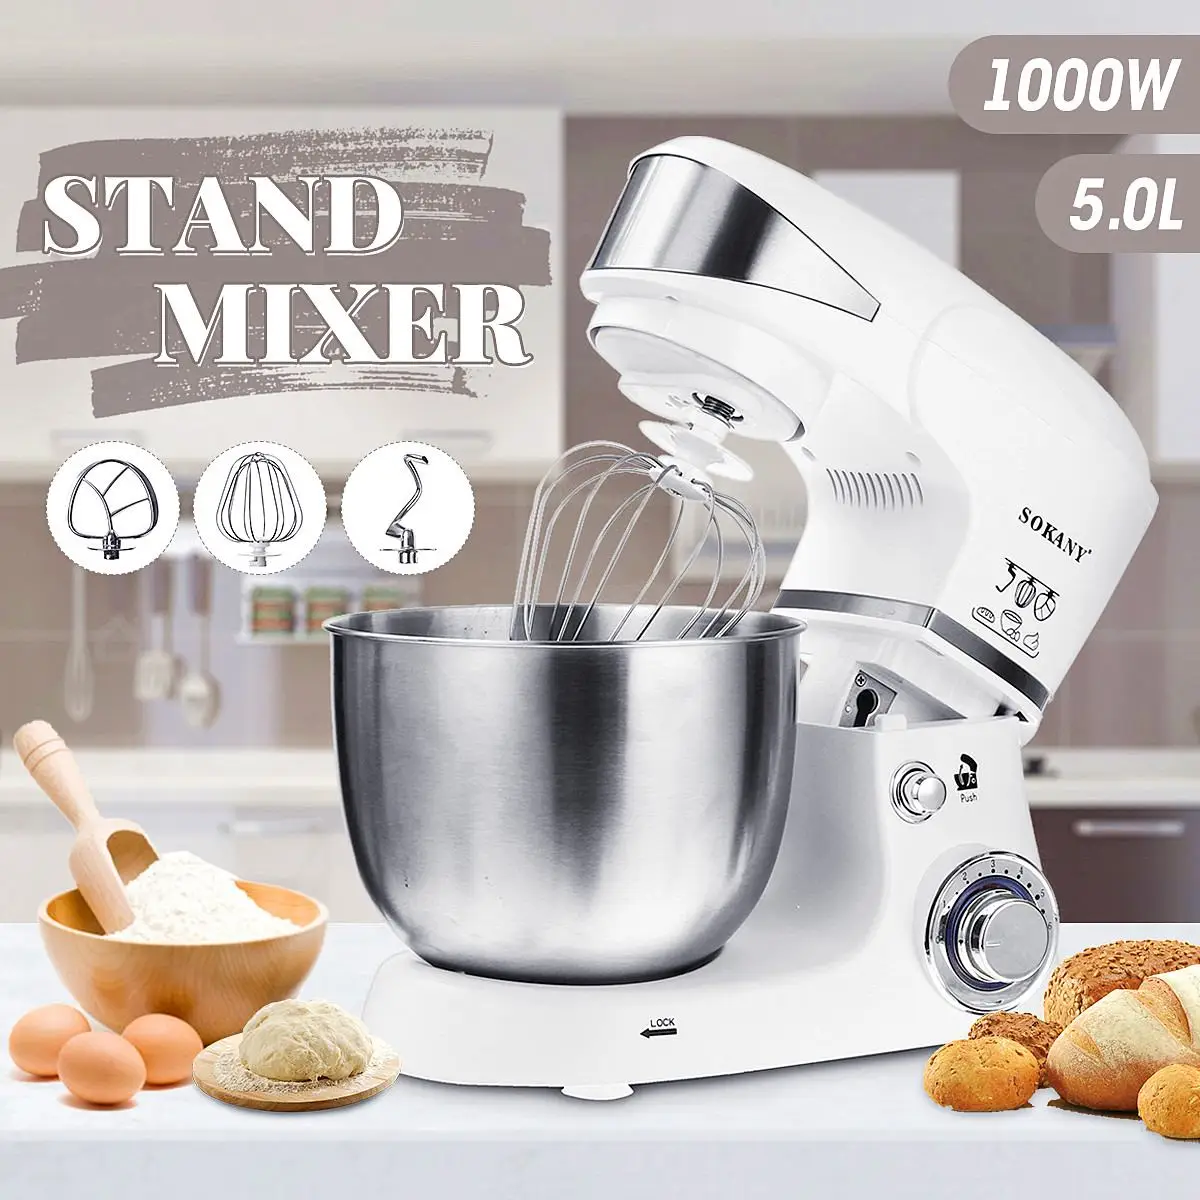 

SOKANY Stand Mixer 1000W 5L Stainless Steel Kitchen Dough Mixer 6 Speed Food Blender With Hook Whisk Beater 206